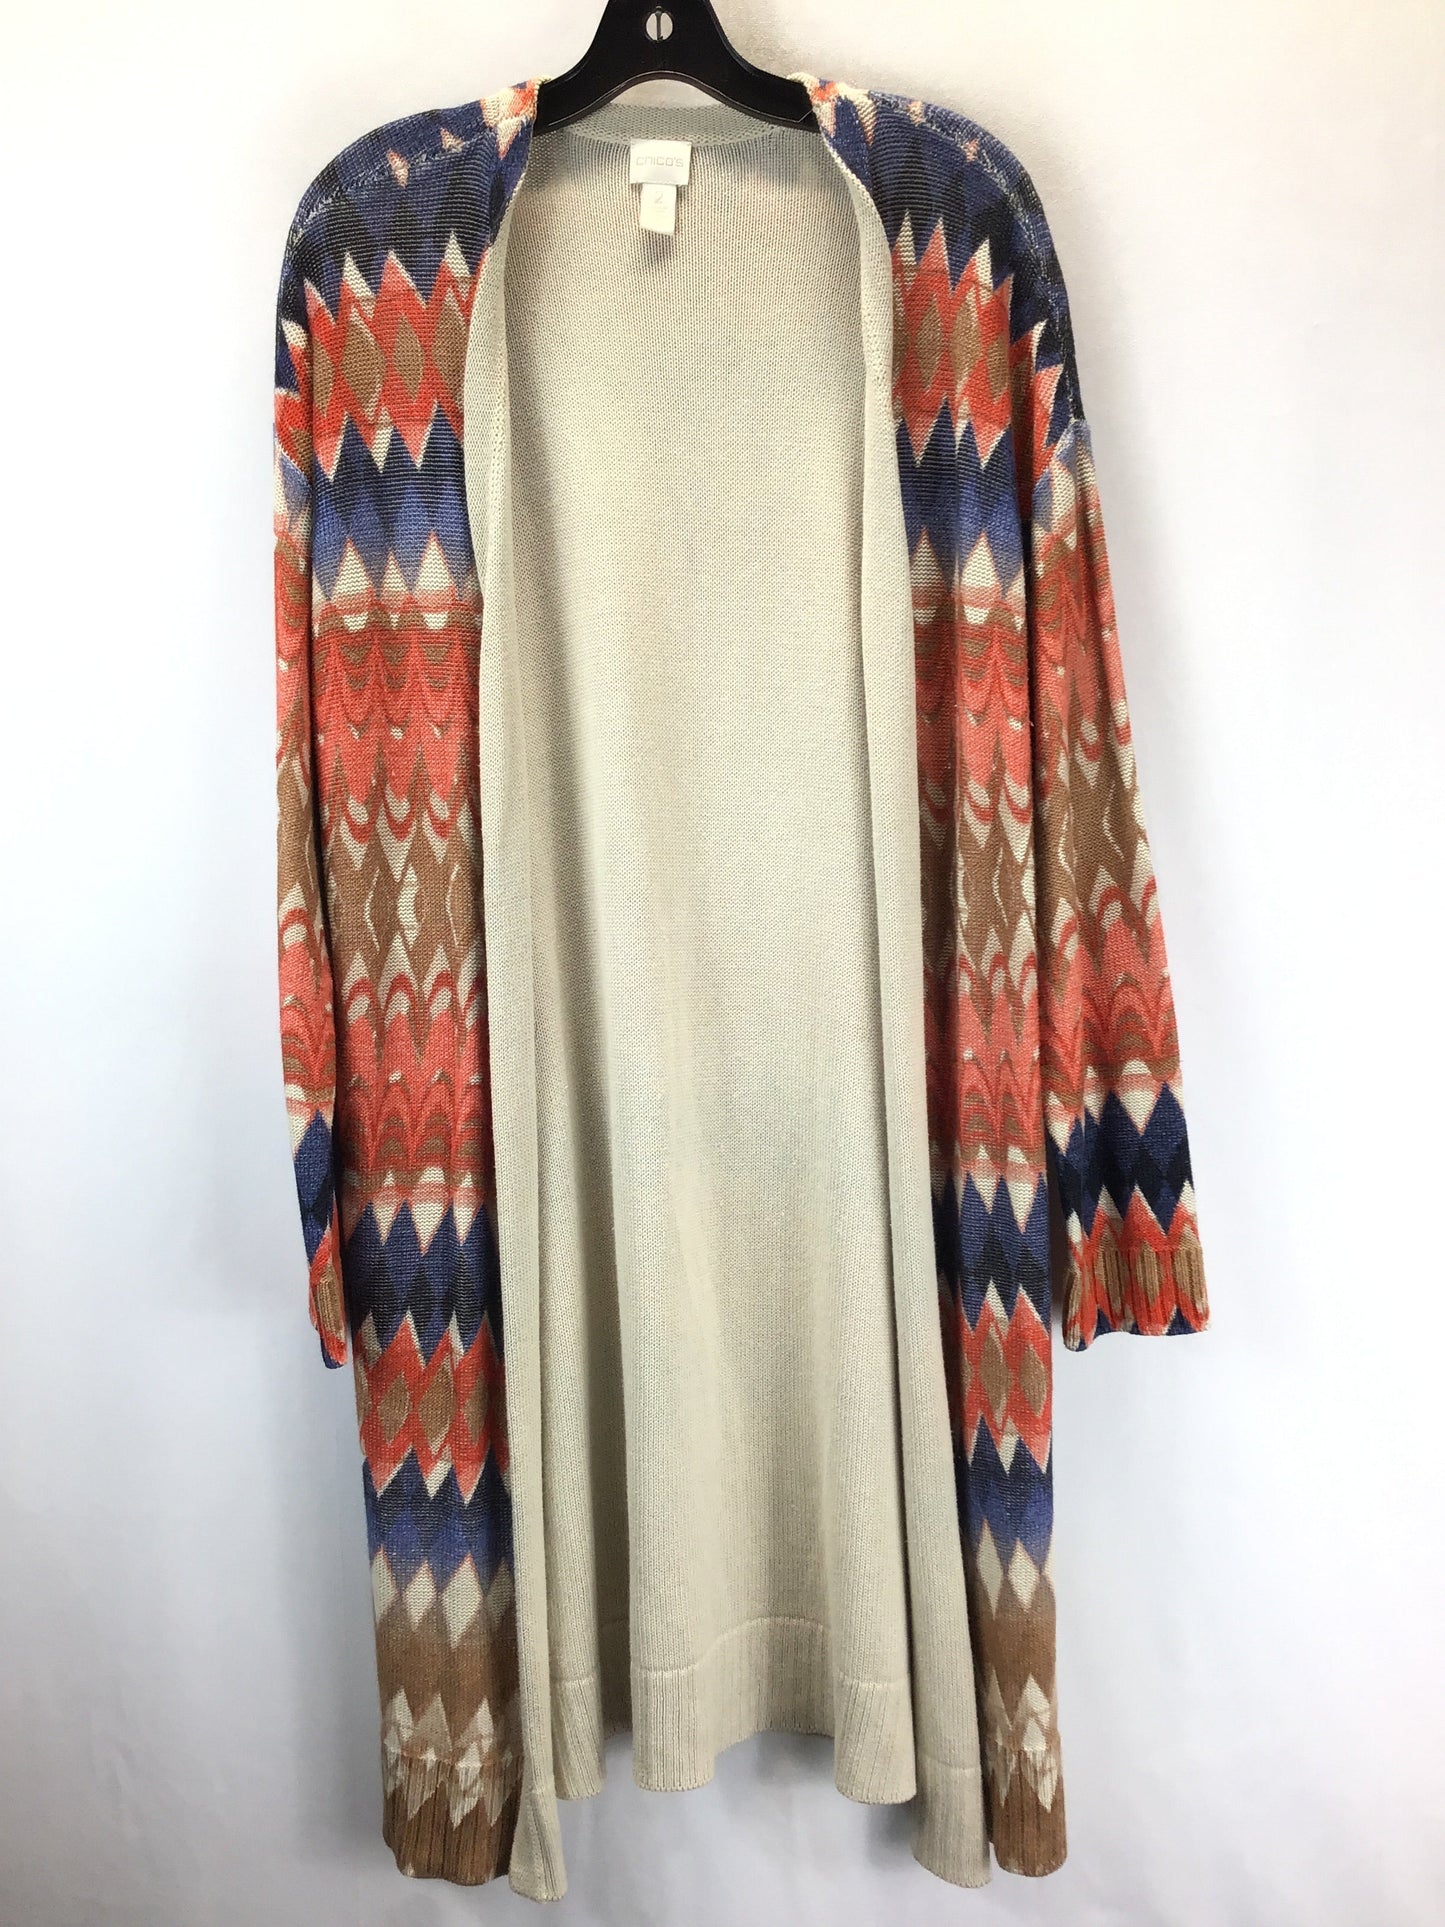 Sweater Cardigan By Chicos  Size: L